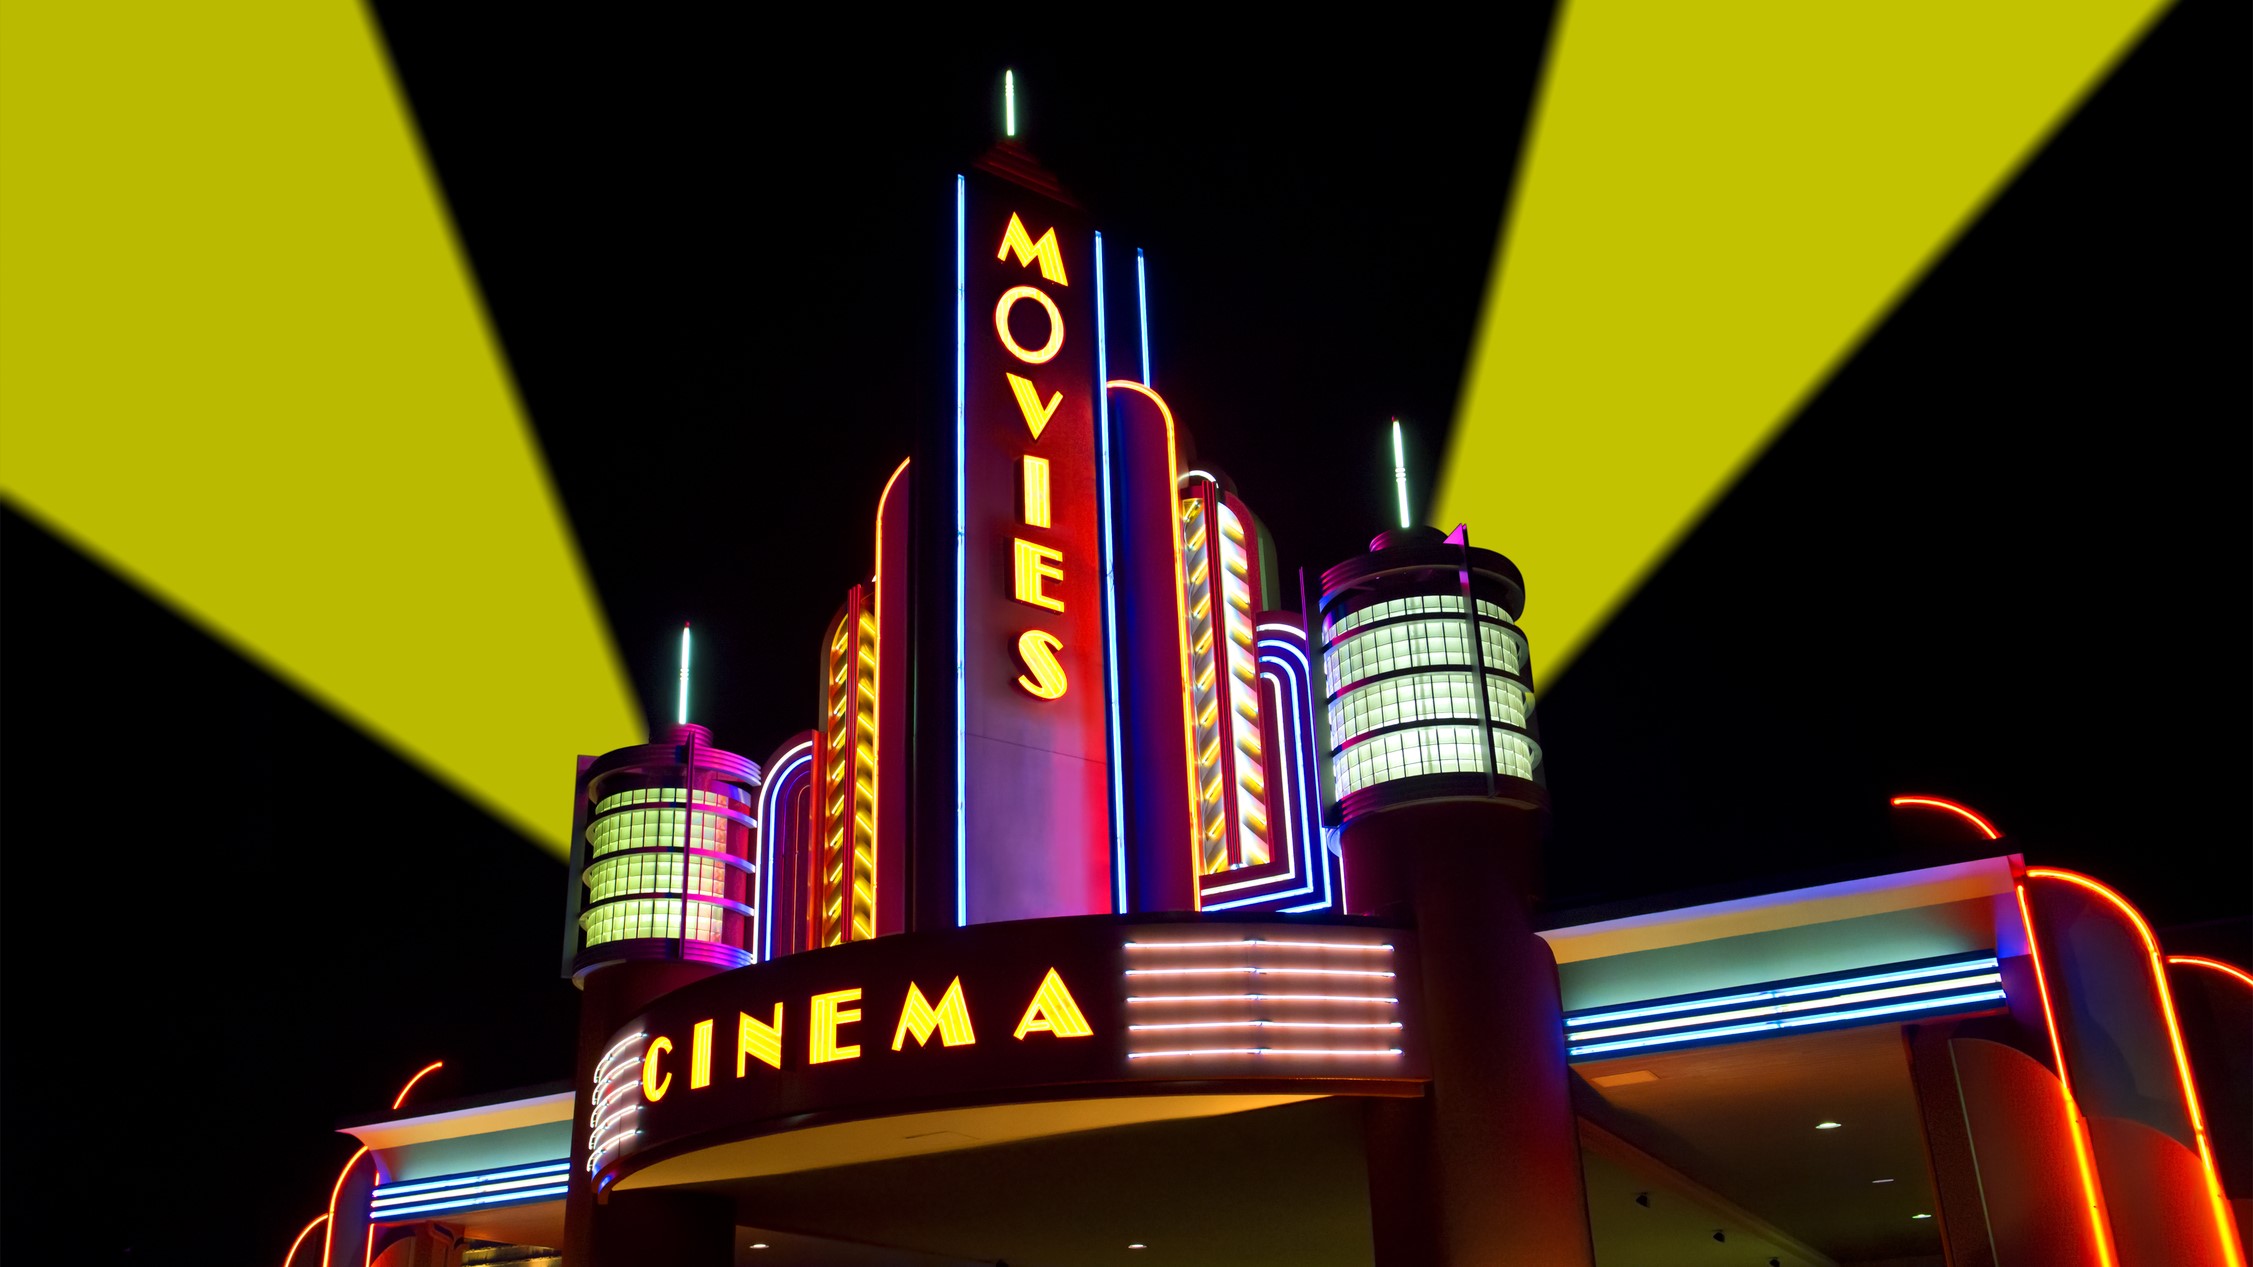 Concept for the movies, arts, cinema, or film inspiring your career. Seen here is a modern movie theater with a retro look. 